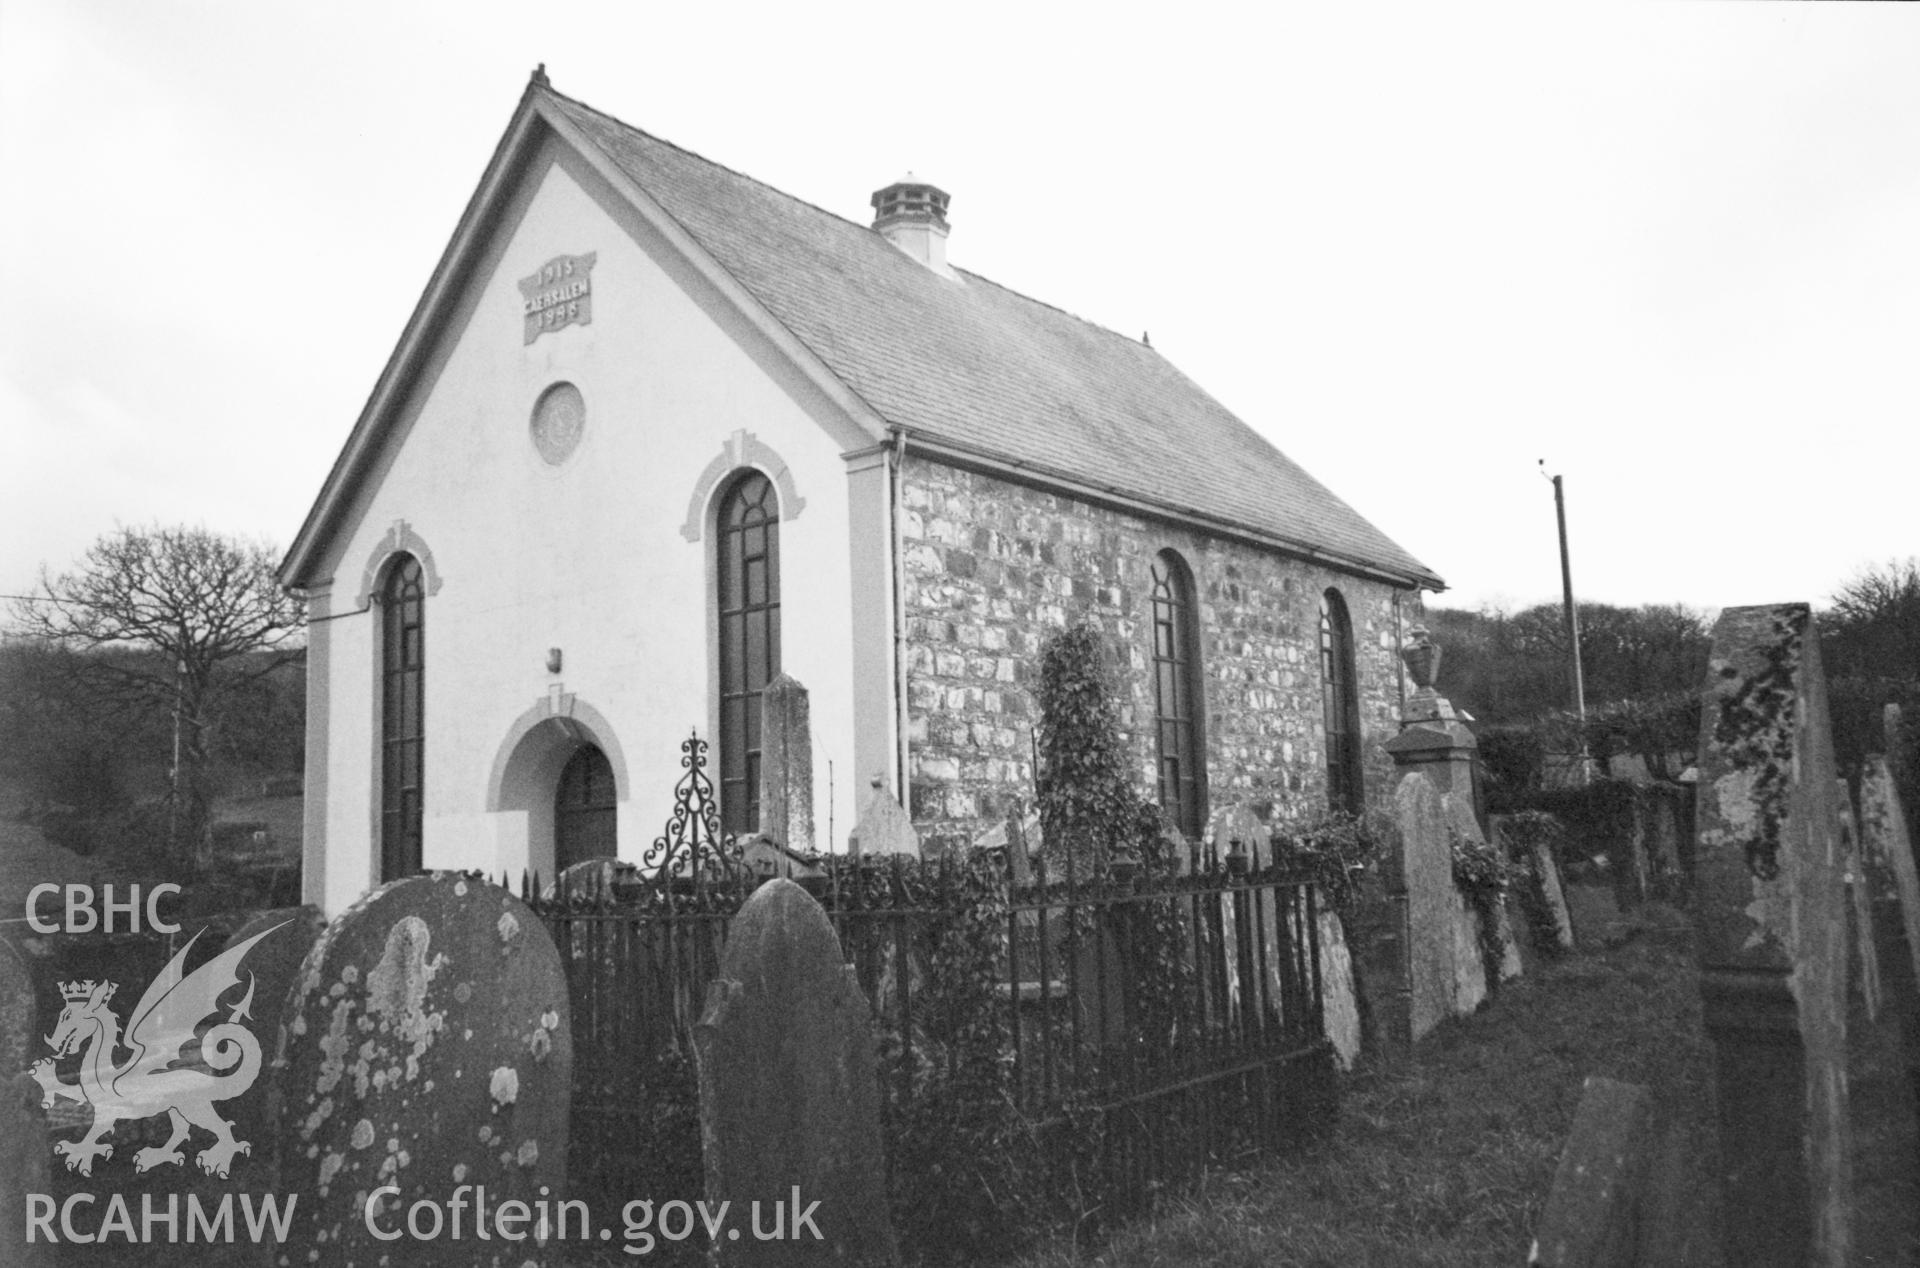 Digital copy of a black and white photograph showing an exterior view of Caersalem Welsh Baptist Chapel, Cilgwyn, taken by Robert Scourfield, 1996.